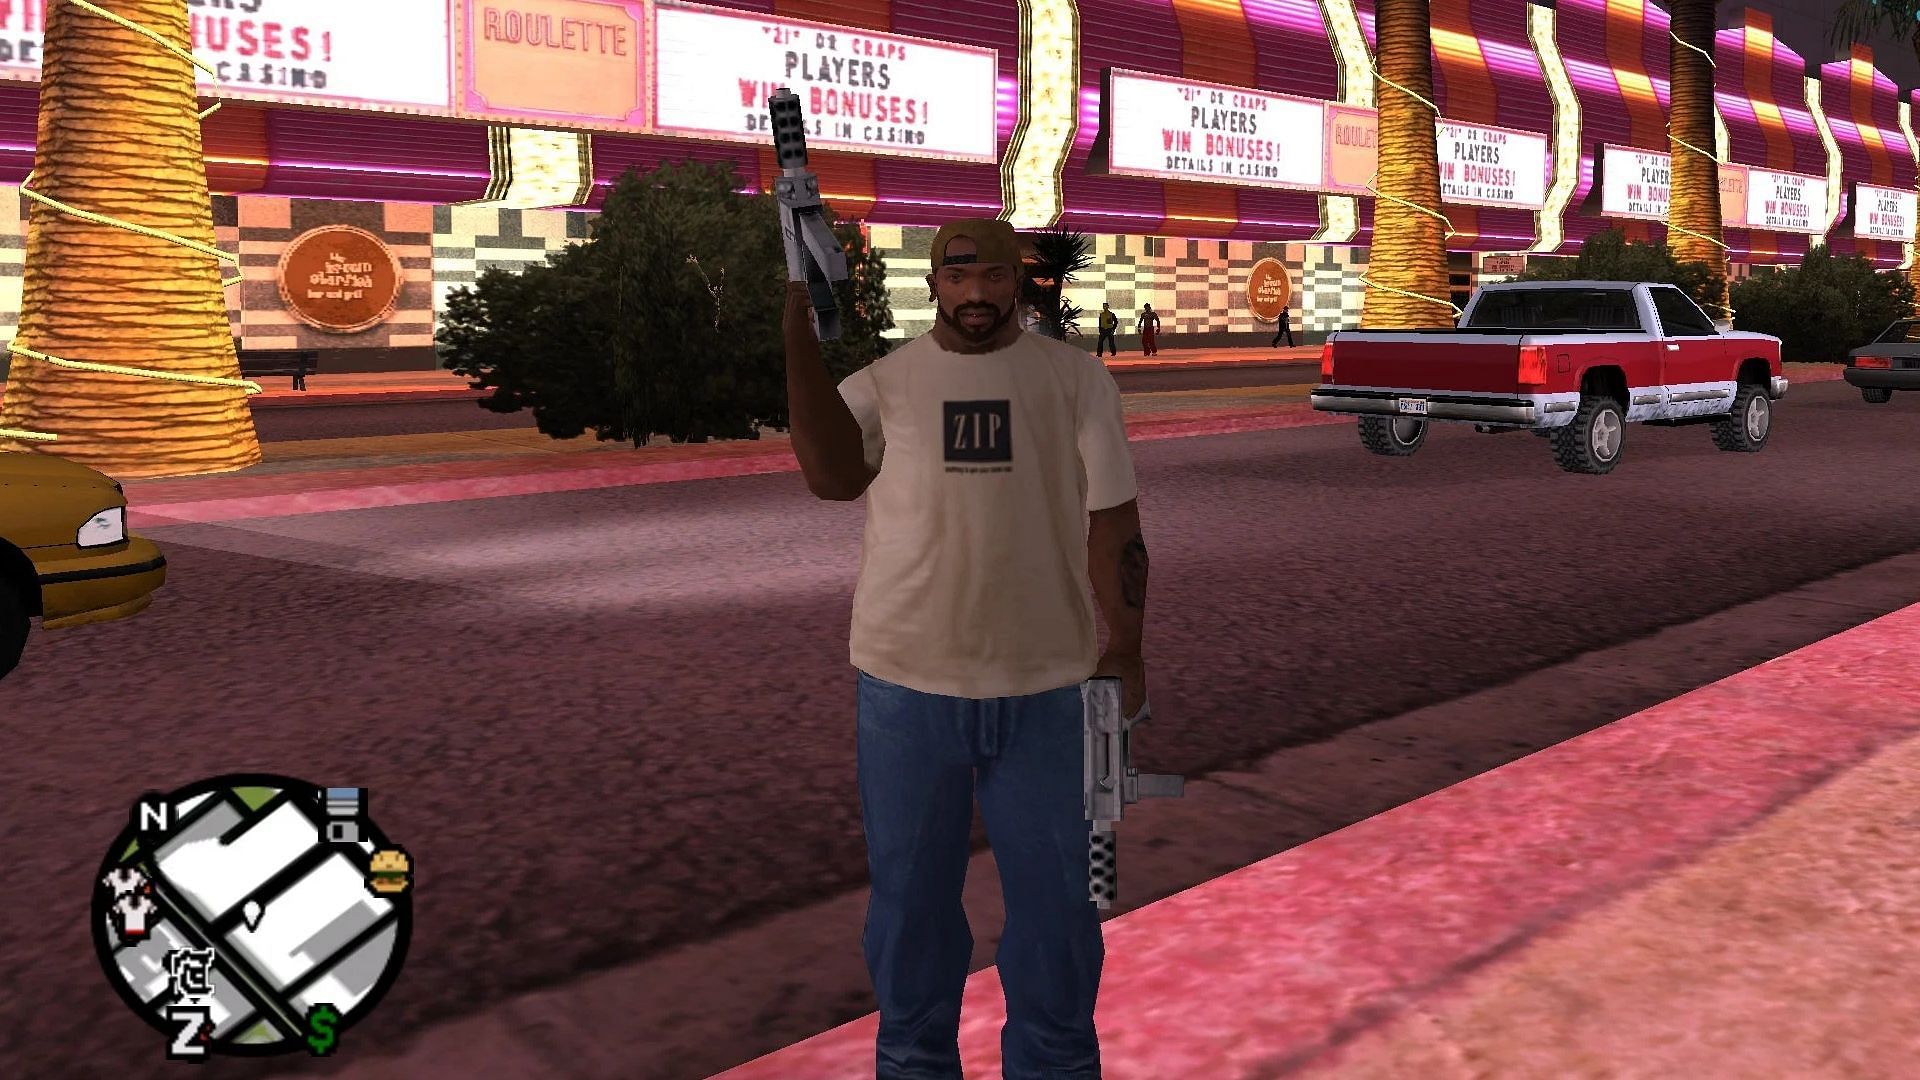 5 awesome gameplay features GTA San Andreas did better than GTA 5